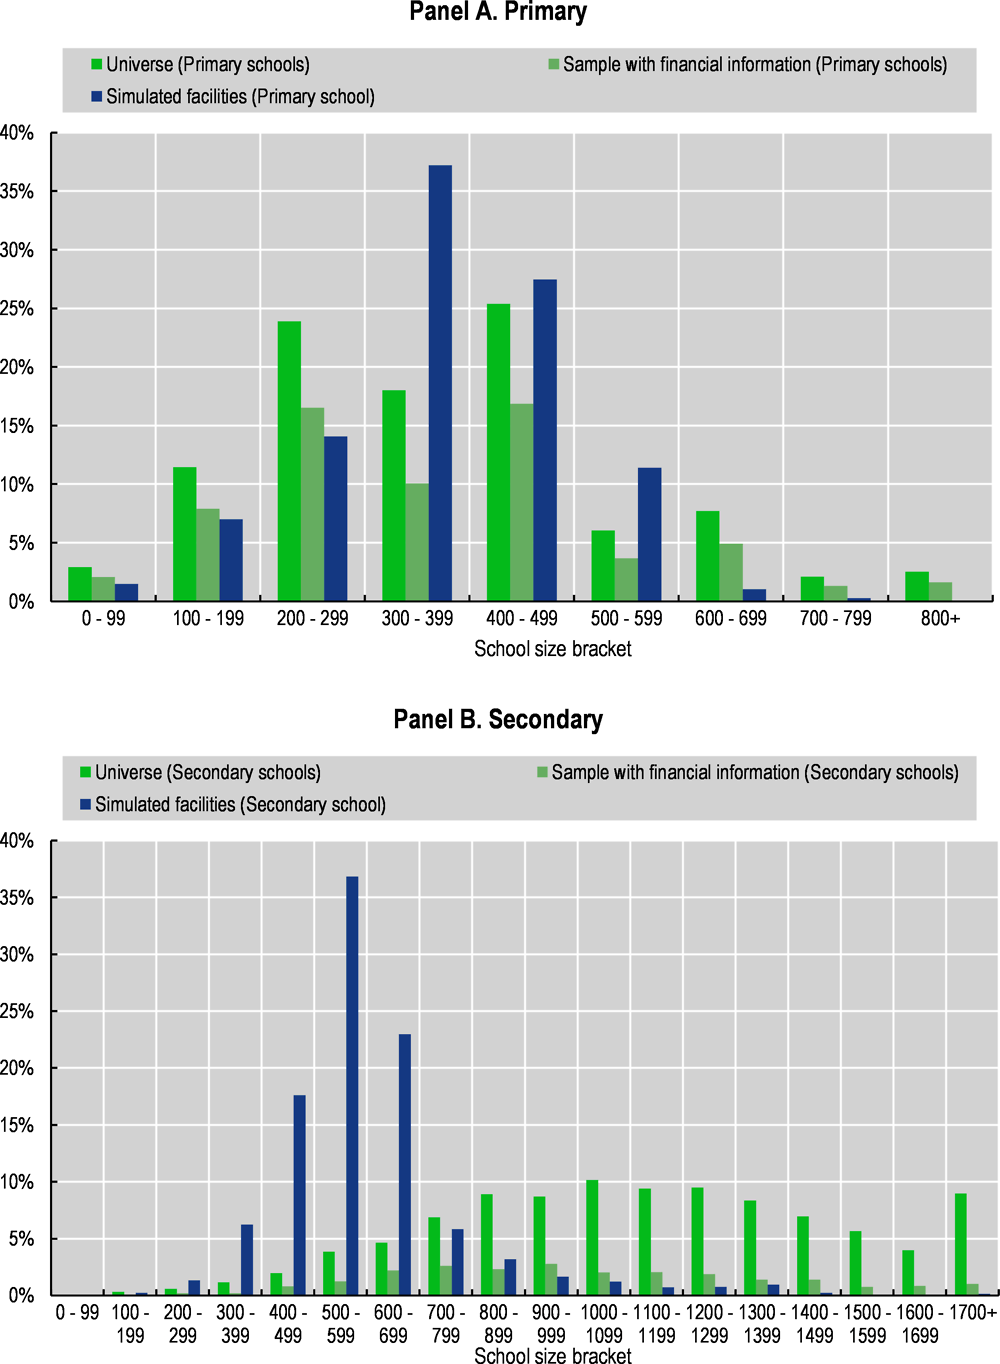 Annex Figure 2.C.1. Size distribution of primary and secondary schools, England